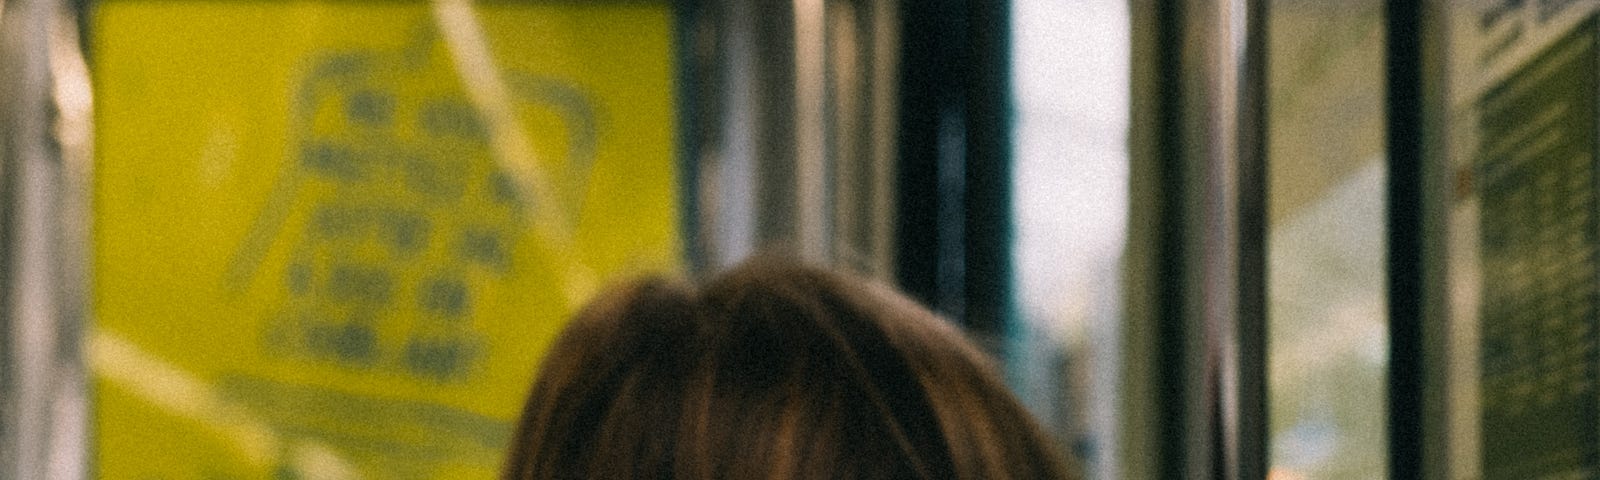 The back of the head of a brunette woman sitting on a bus. Photo by Mathias Reding: https://www.pexels.com/photo/back-of-the-head-of-a-woman-sitting-in-a-bus-9845230/